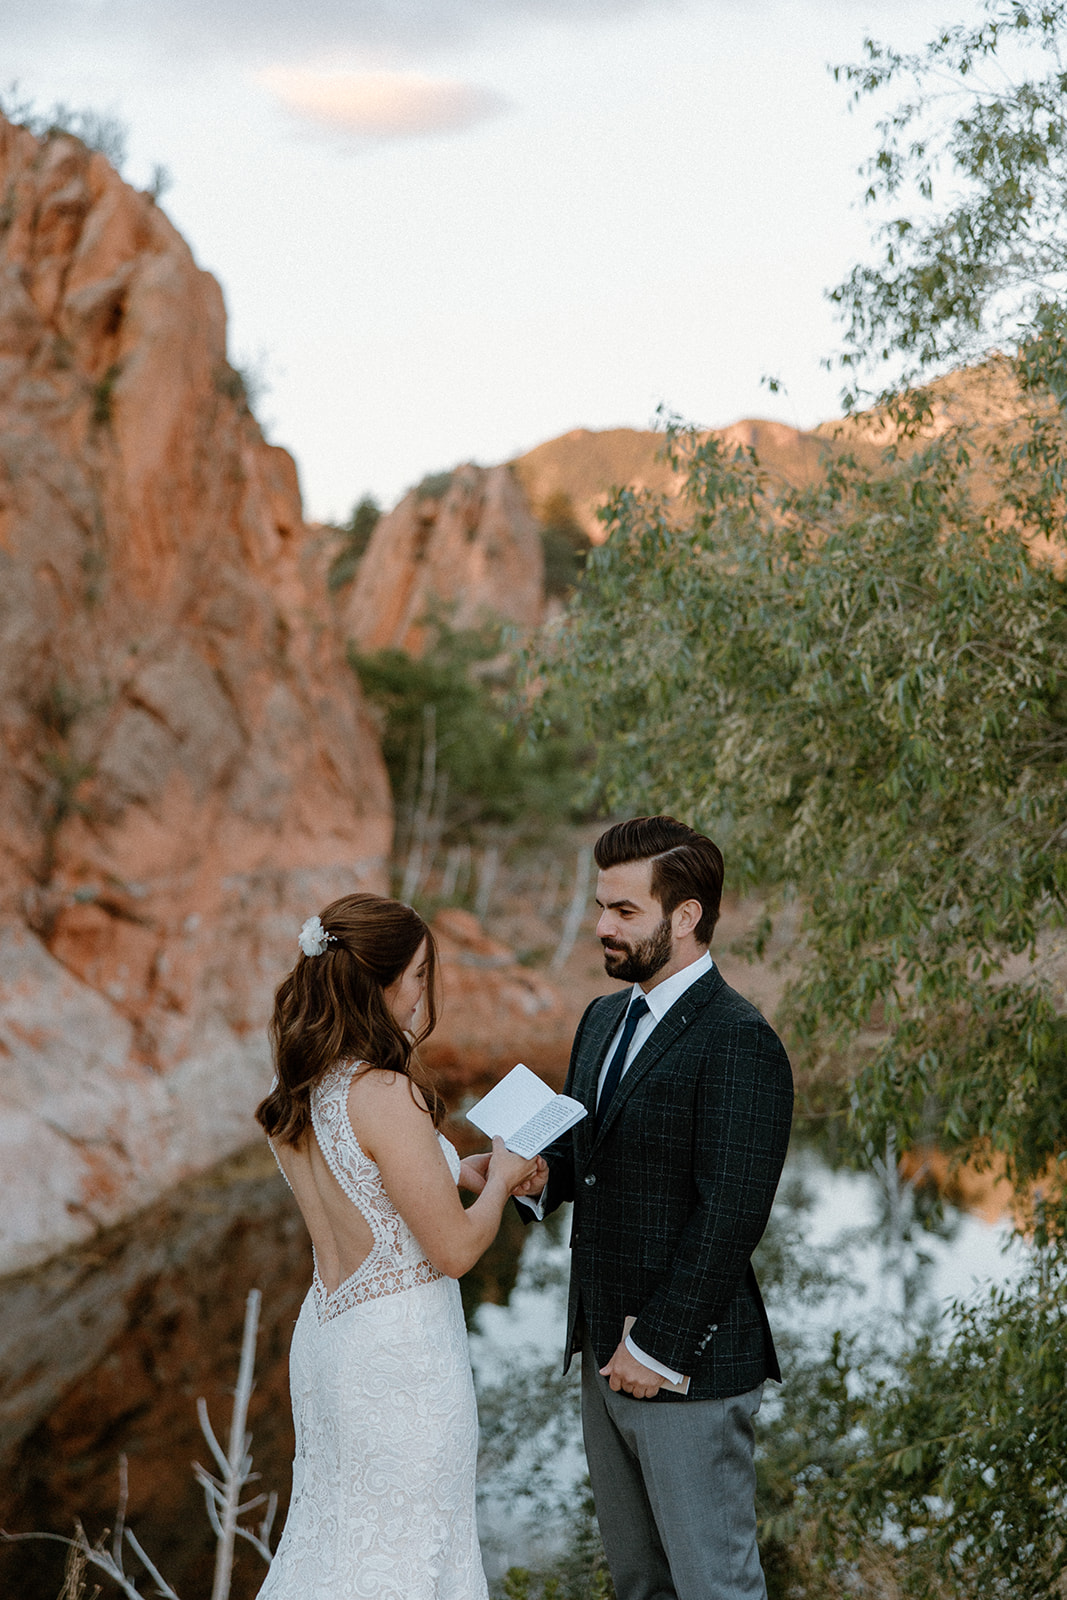 Sunrise Colorado elopement at Red Rock Canyon Open Space